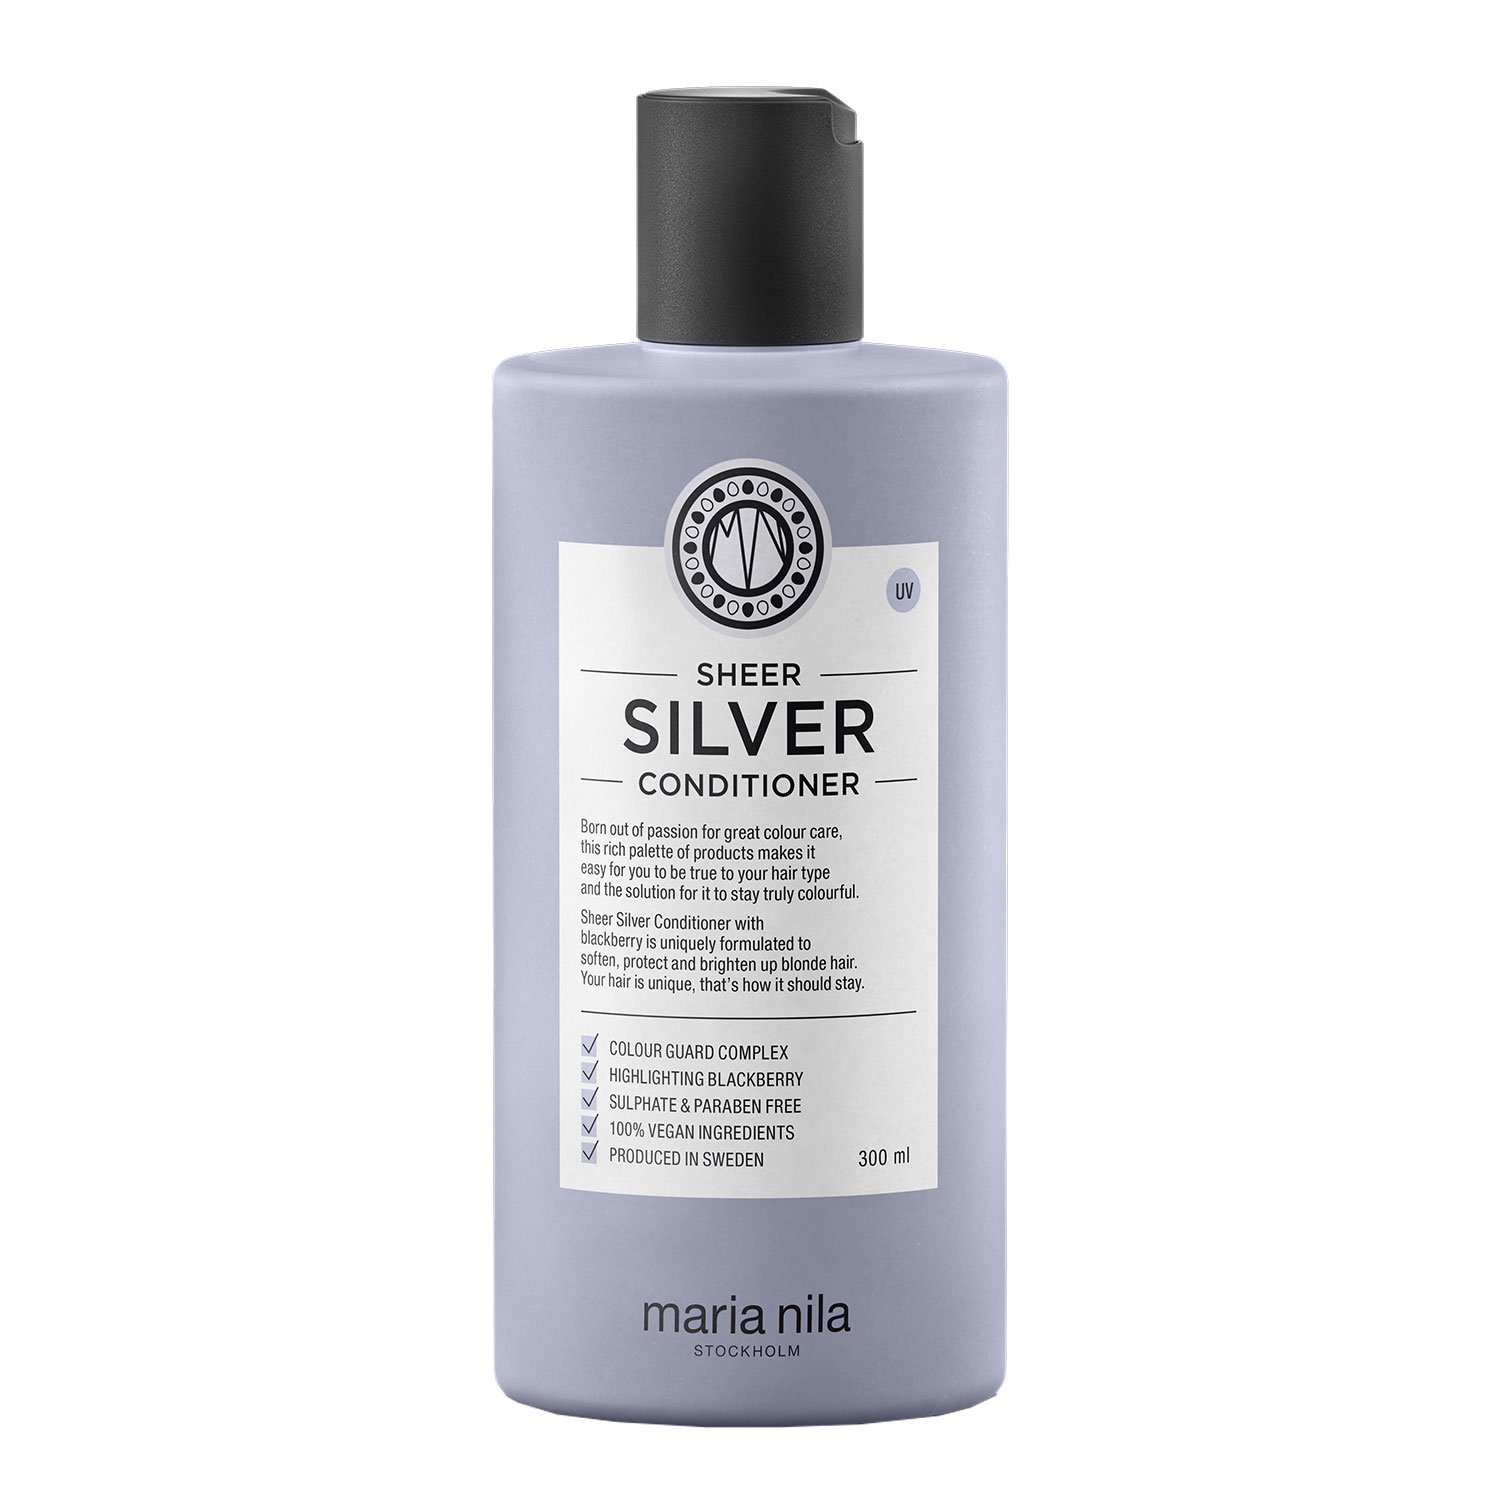 Product image from Care & Style - Sheer Silver Conditioner